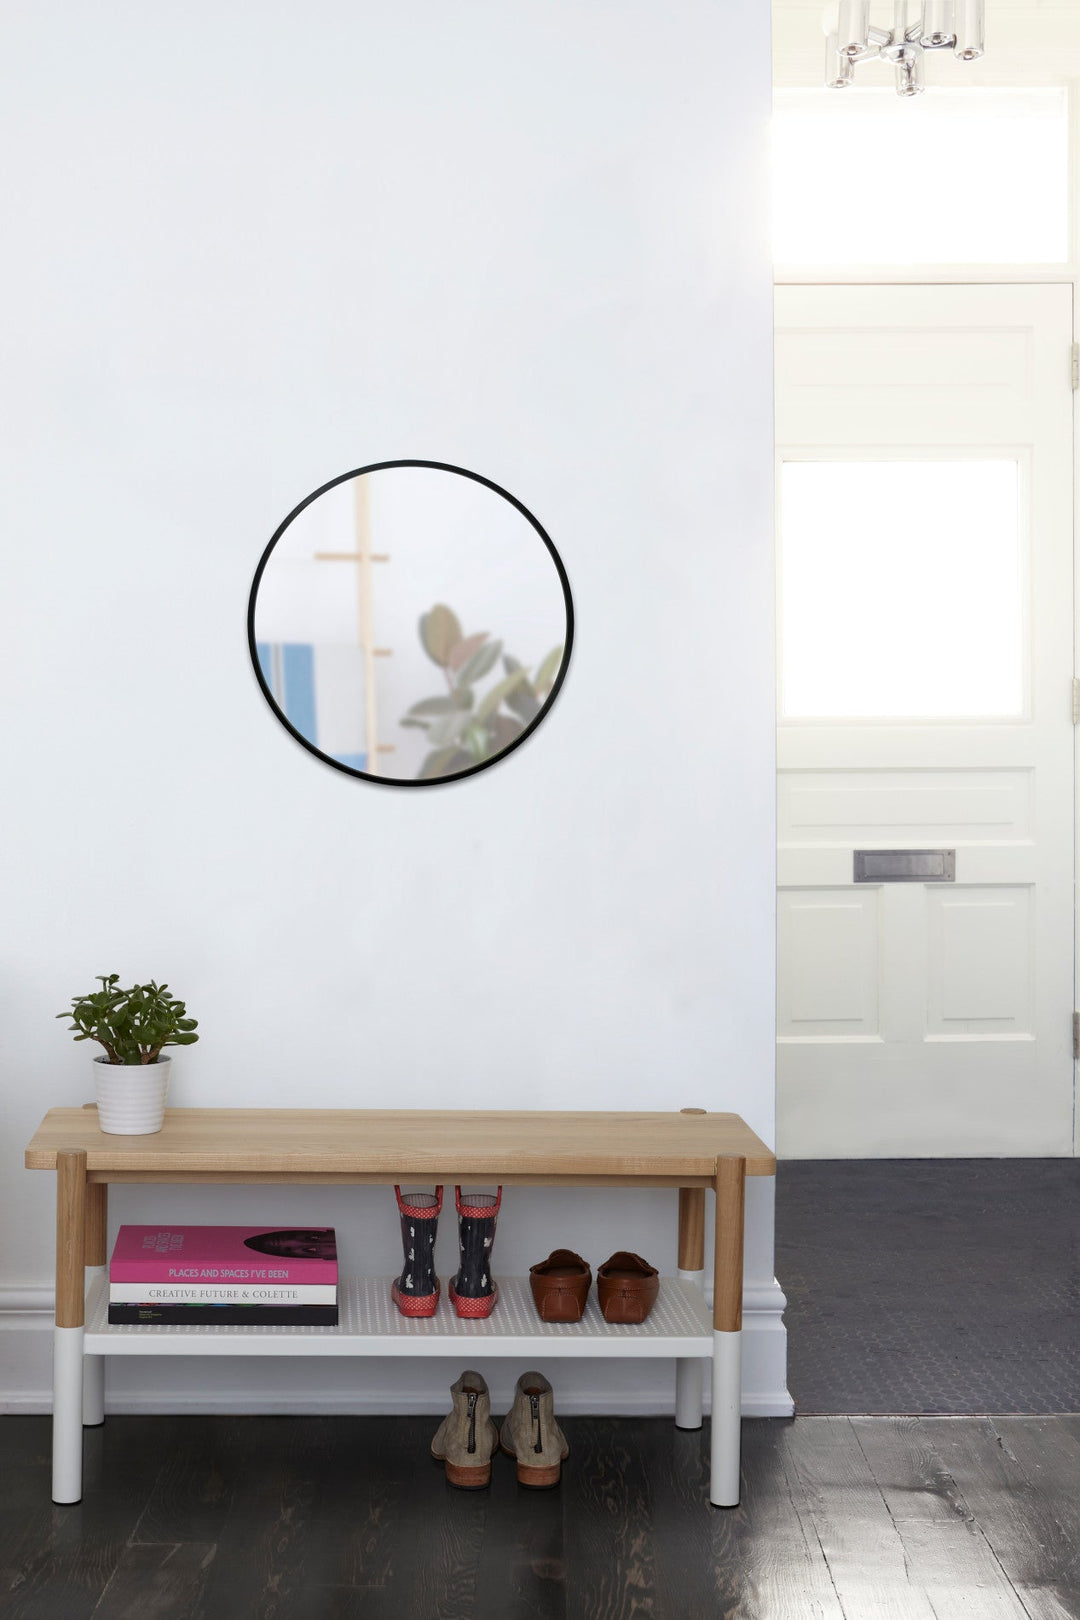 Wall Mirrors | color: Black | size: 24"""" (61 cm)